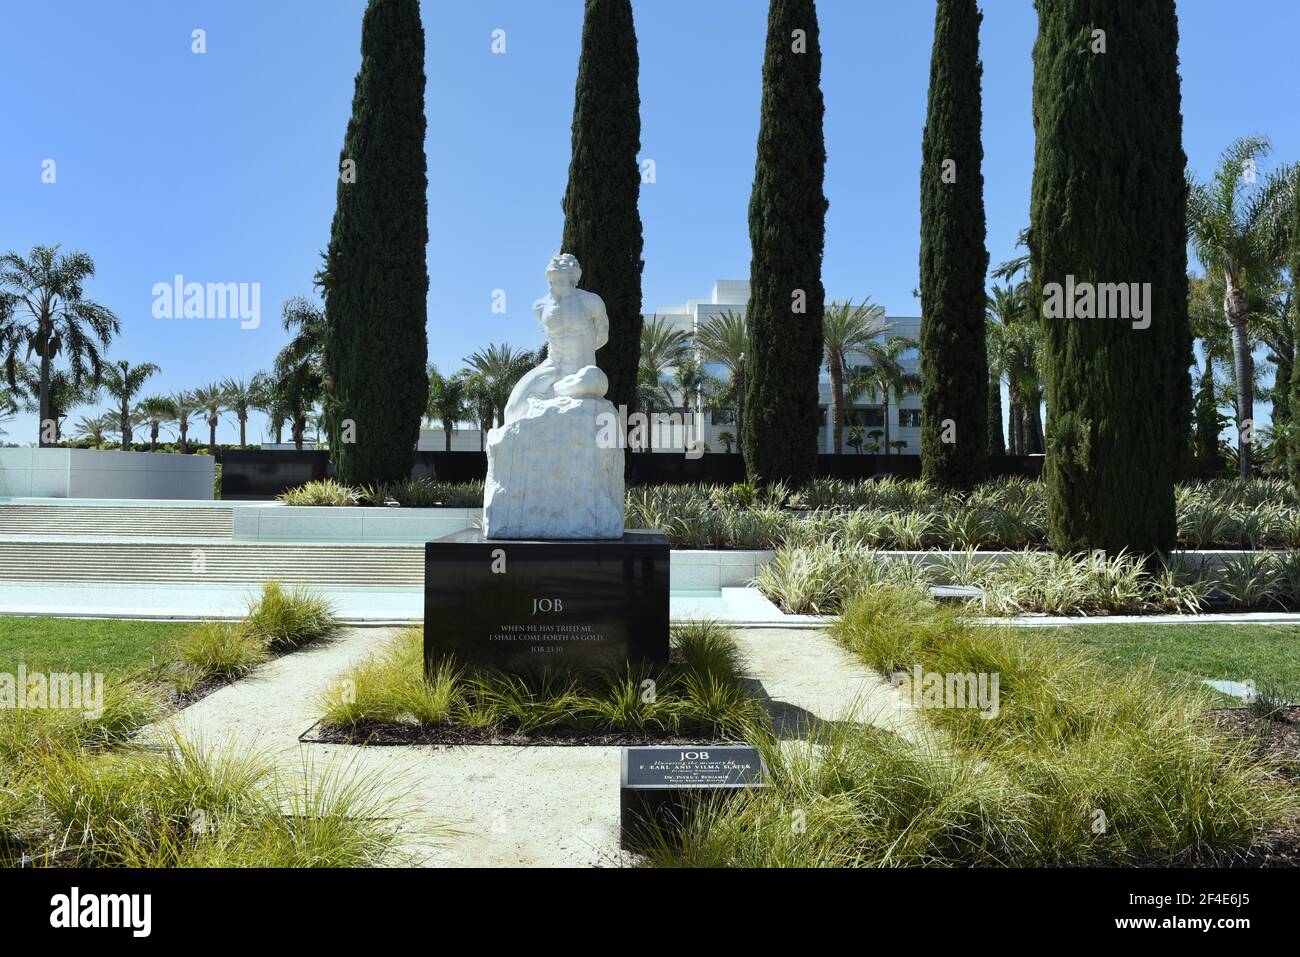 GARDEN GROVE, CALIFORNIA - 20 MAR 2021: Statue of Job with the Christ Cathedral Academy in the background. Stock Photo